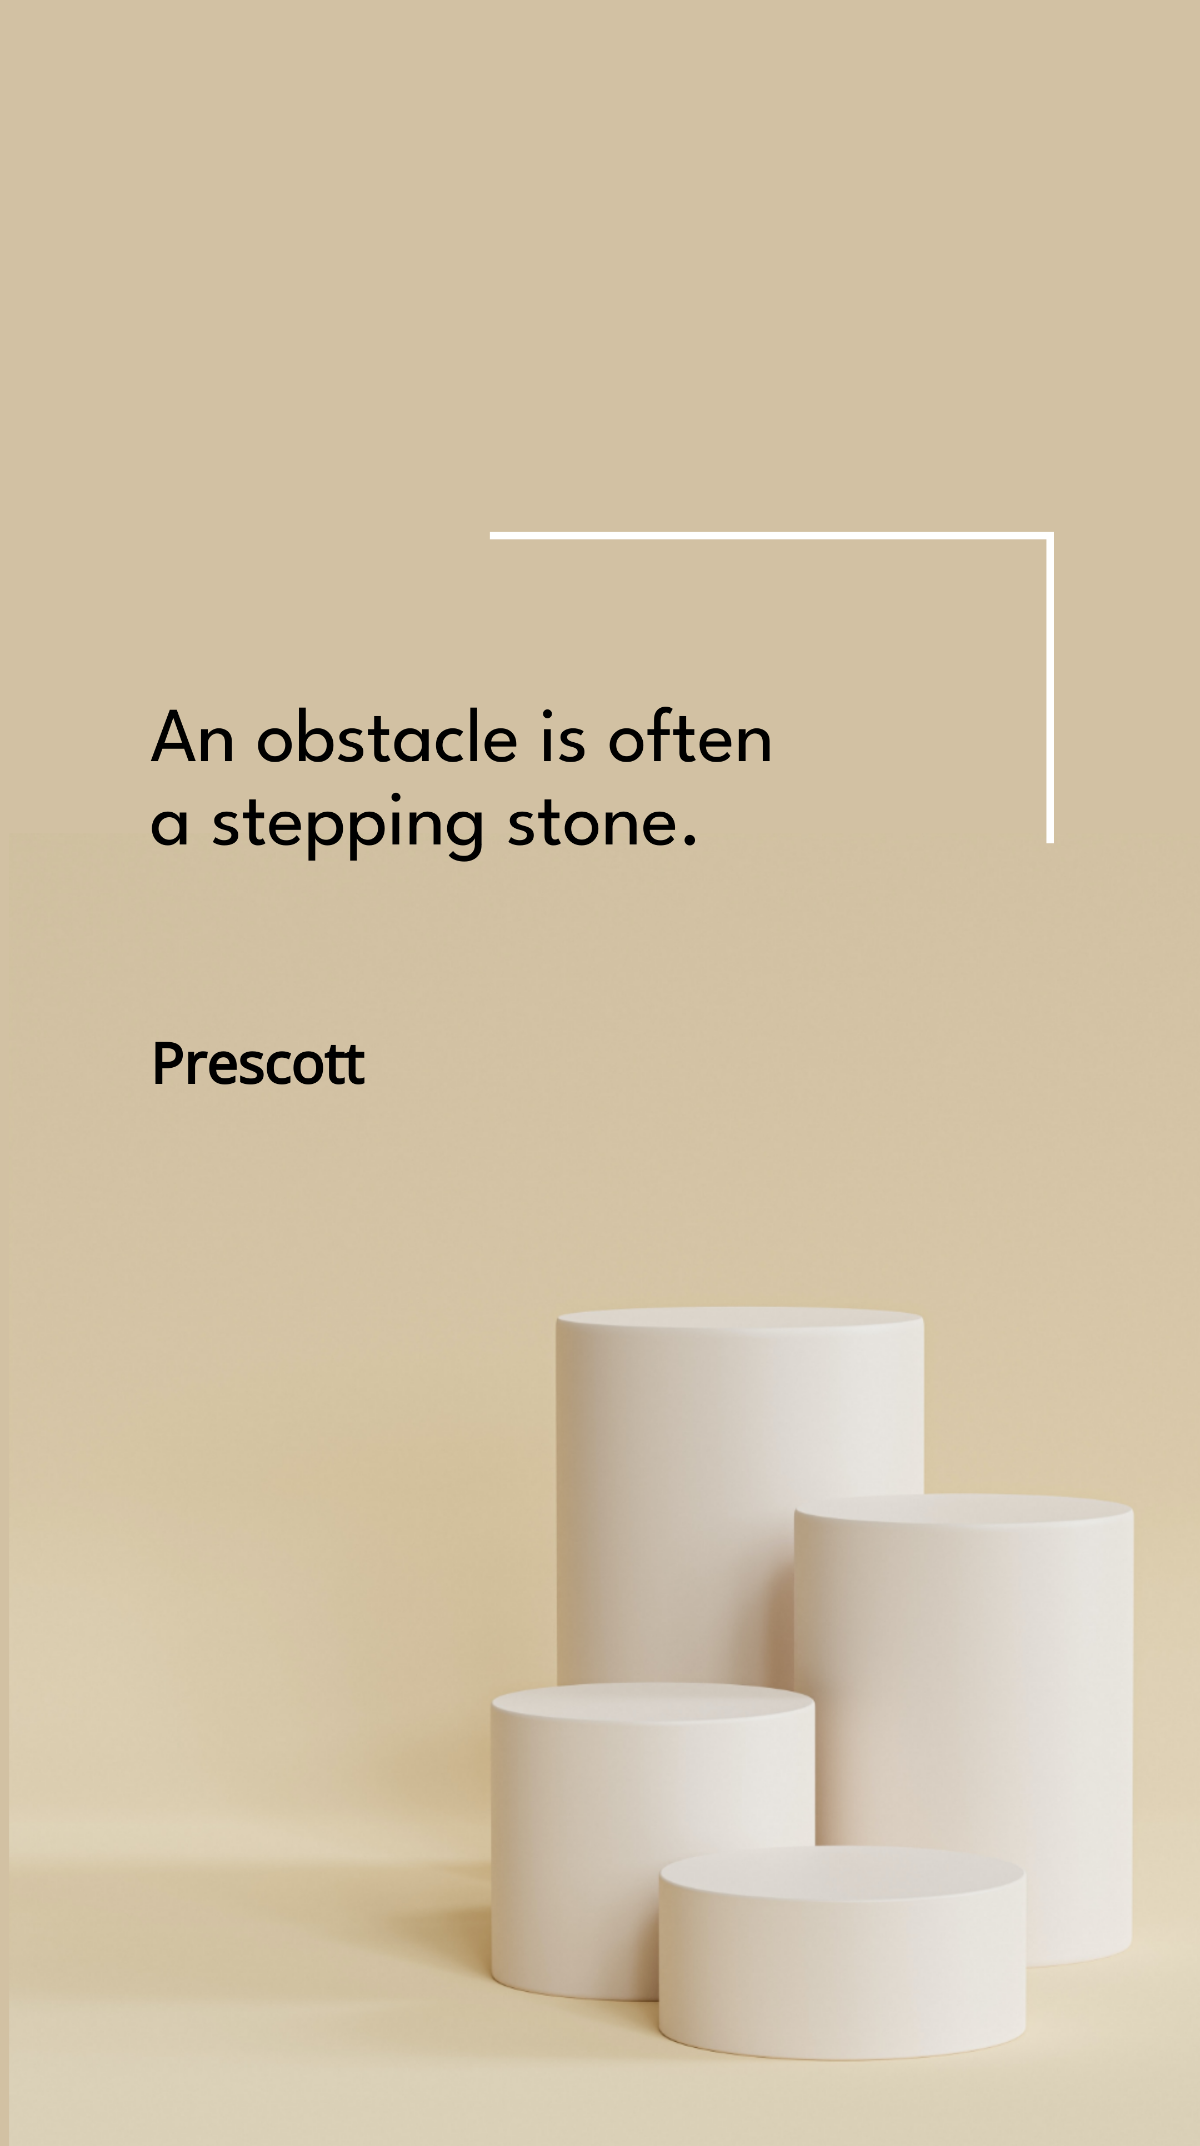 Prescott - An obstacle is often a stepping stone Template